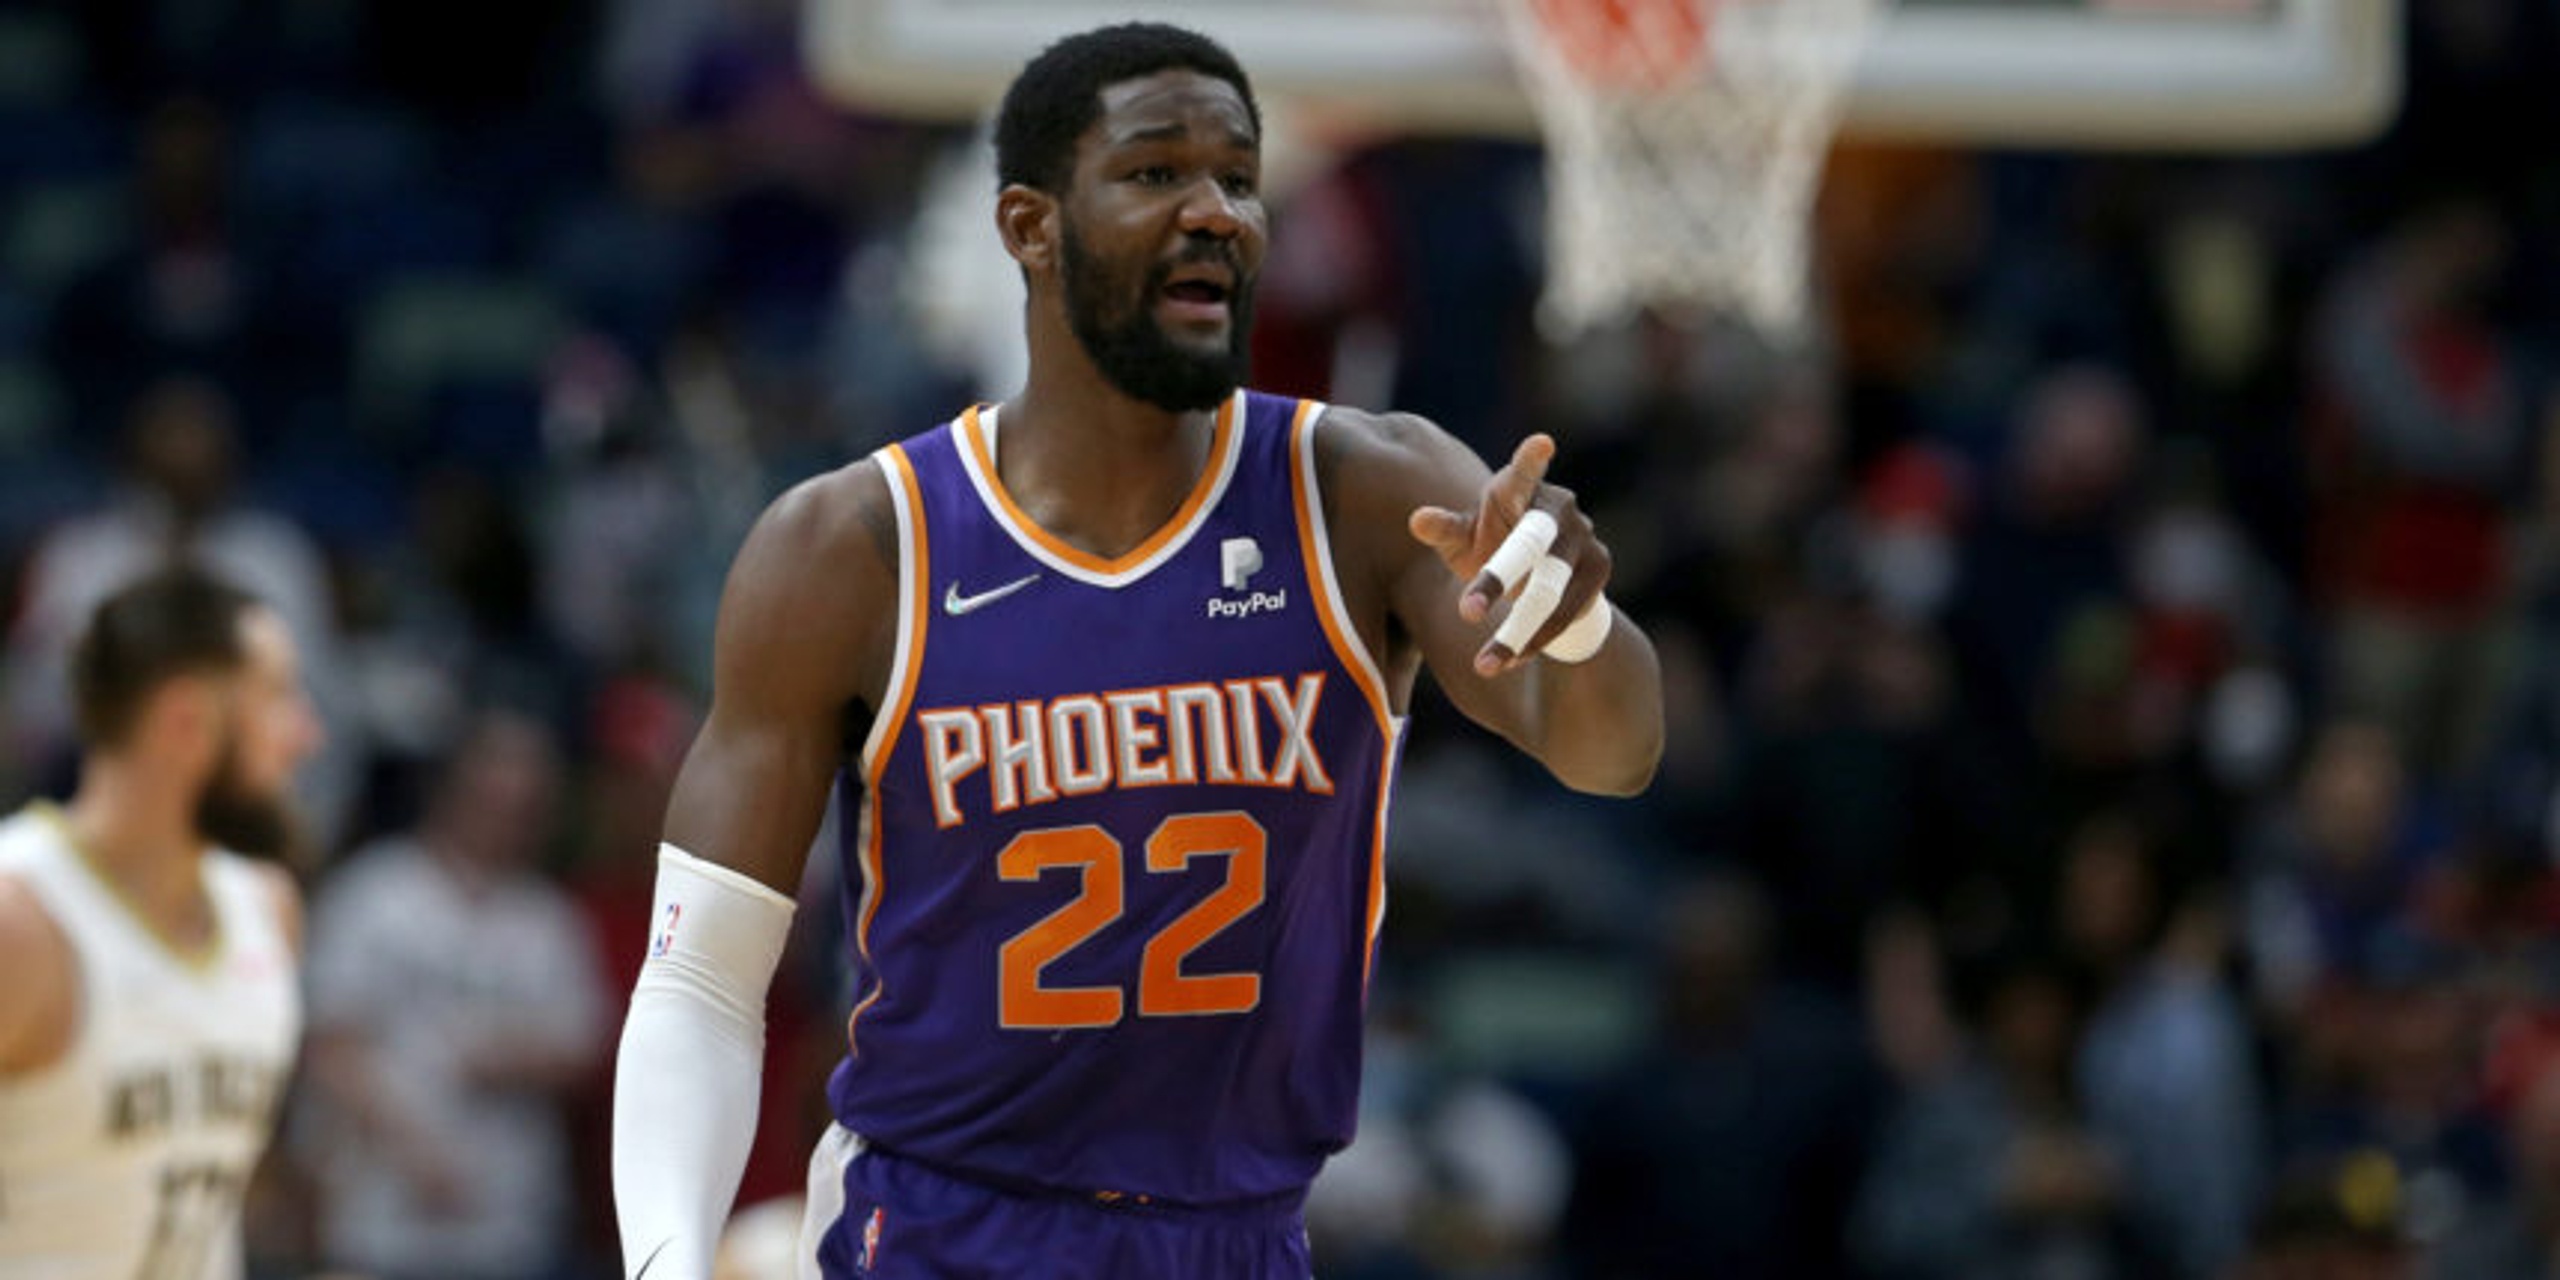 Should Suns give Deandre Ayton a max deal? Positional value says no